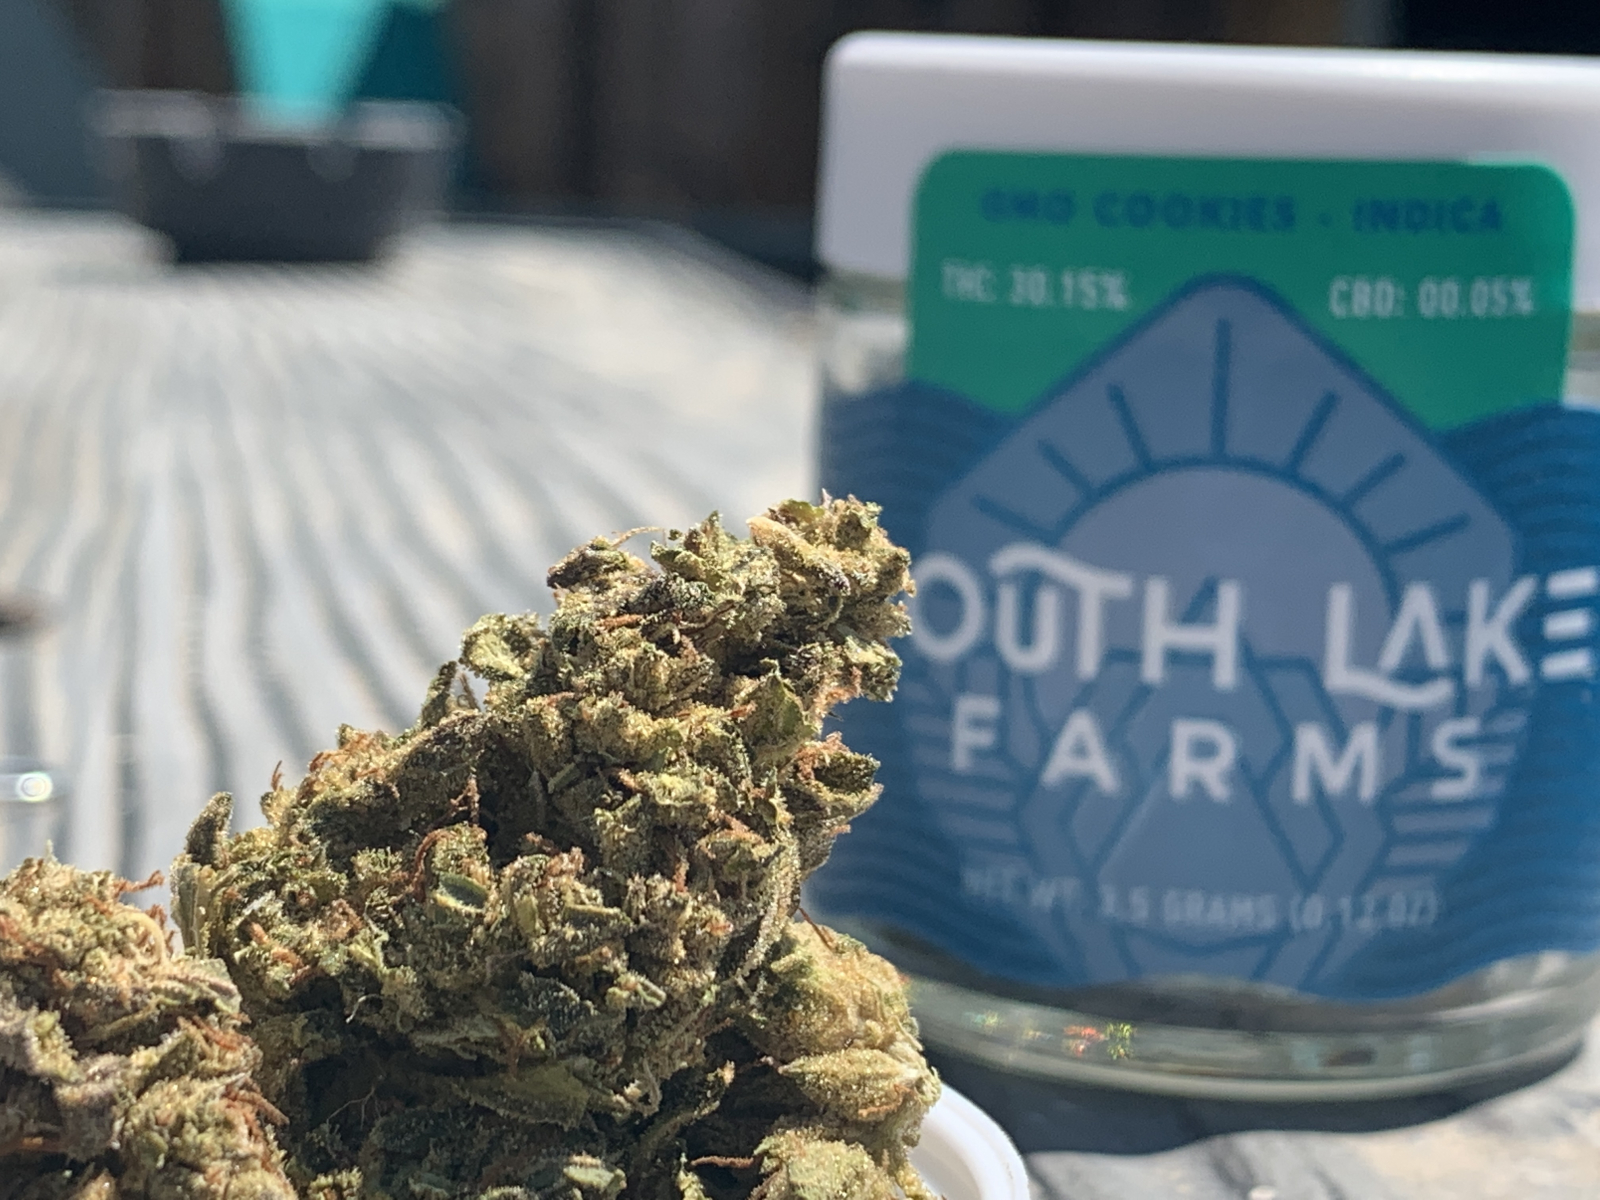 South Lake GMO Cookies packaged eighth 